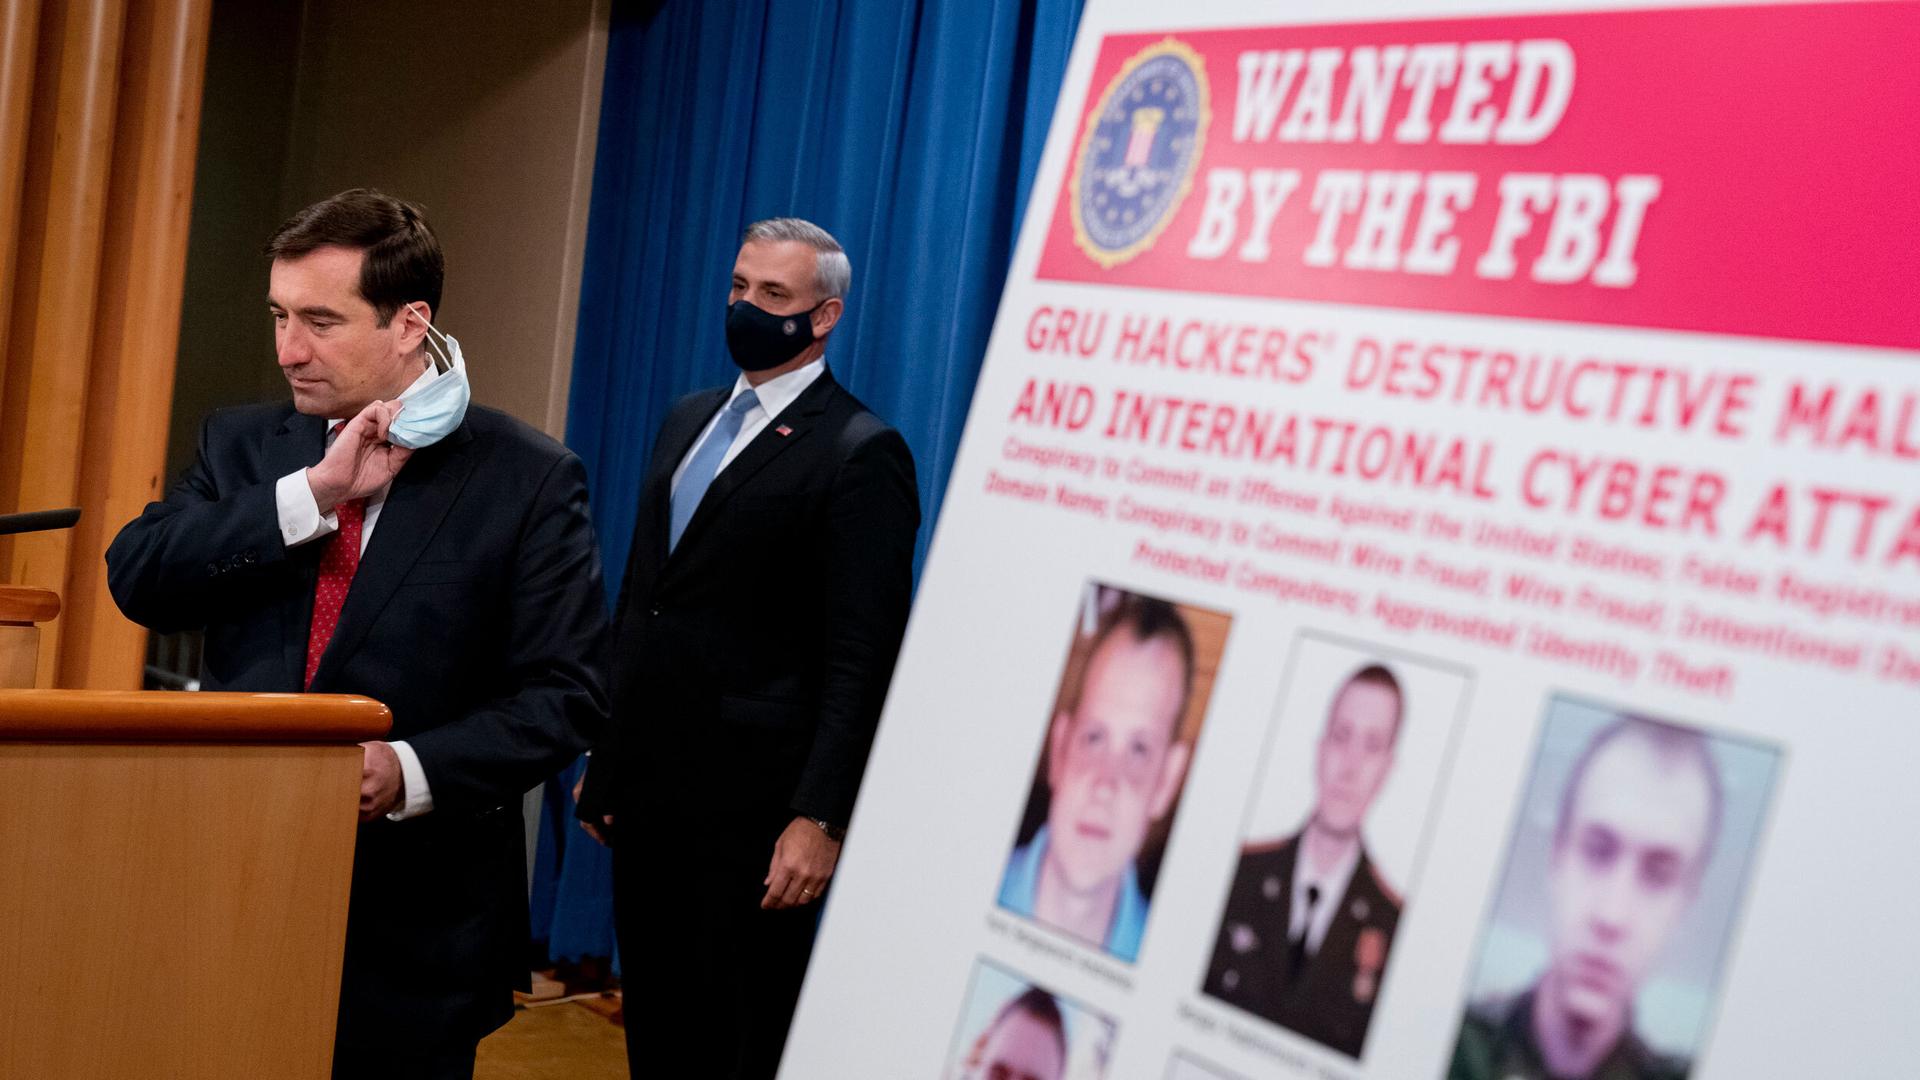 A poster showing six wanted Russian military intelligence officers is displayed as Assistant Attorney General for the National Security Division John Demers, left, takes the podium to speak at a news conference at the Department of Justice, Oct. 19, 2020.